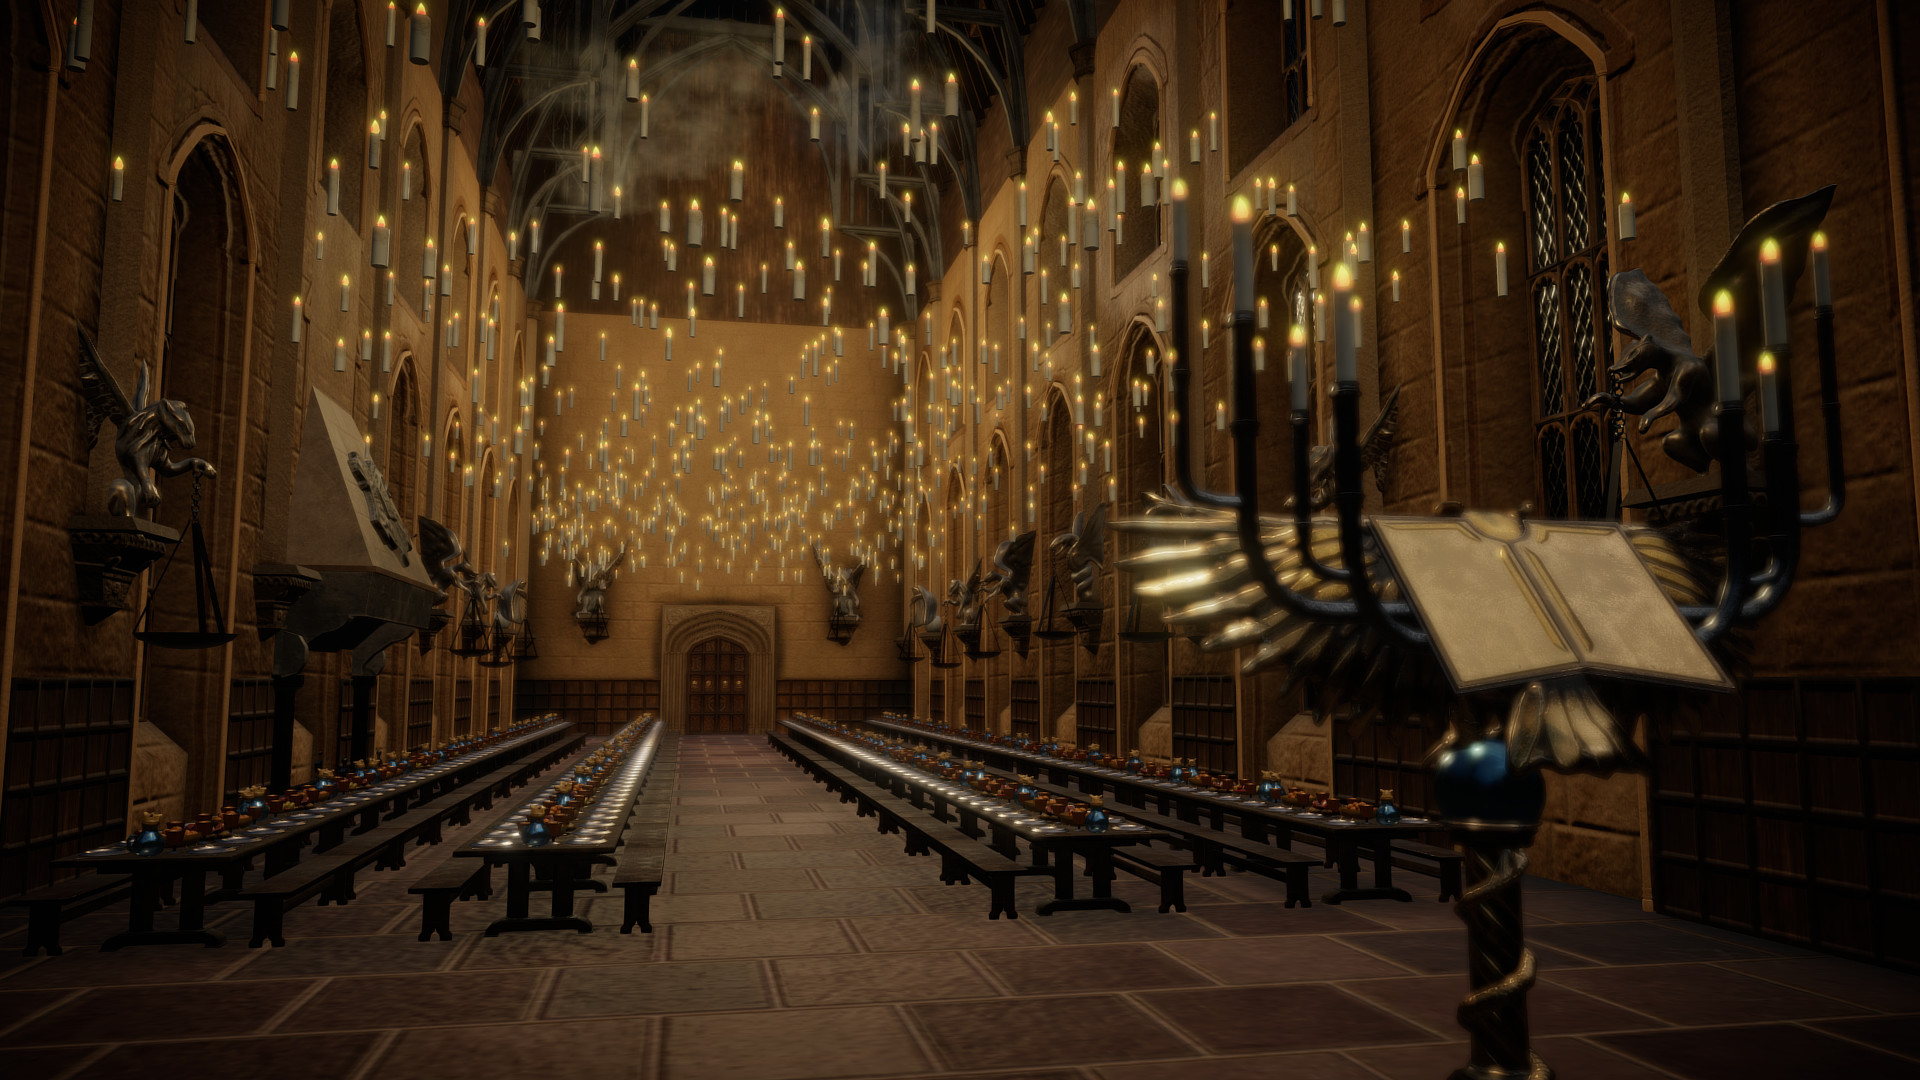 This scene was made in roughly two weeks for the Community Contest “Lights,...